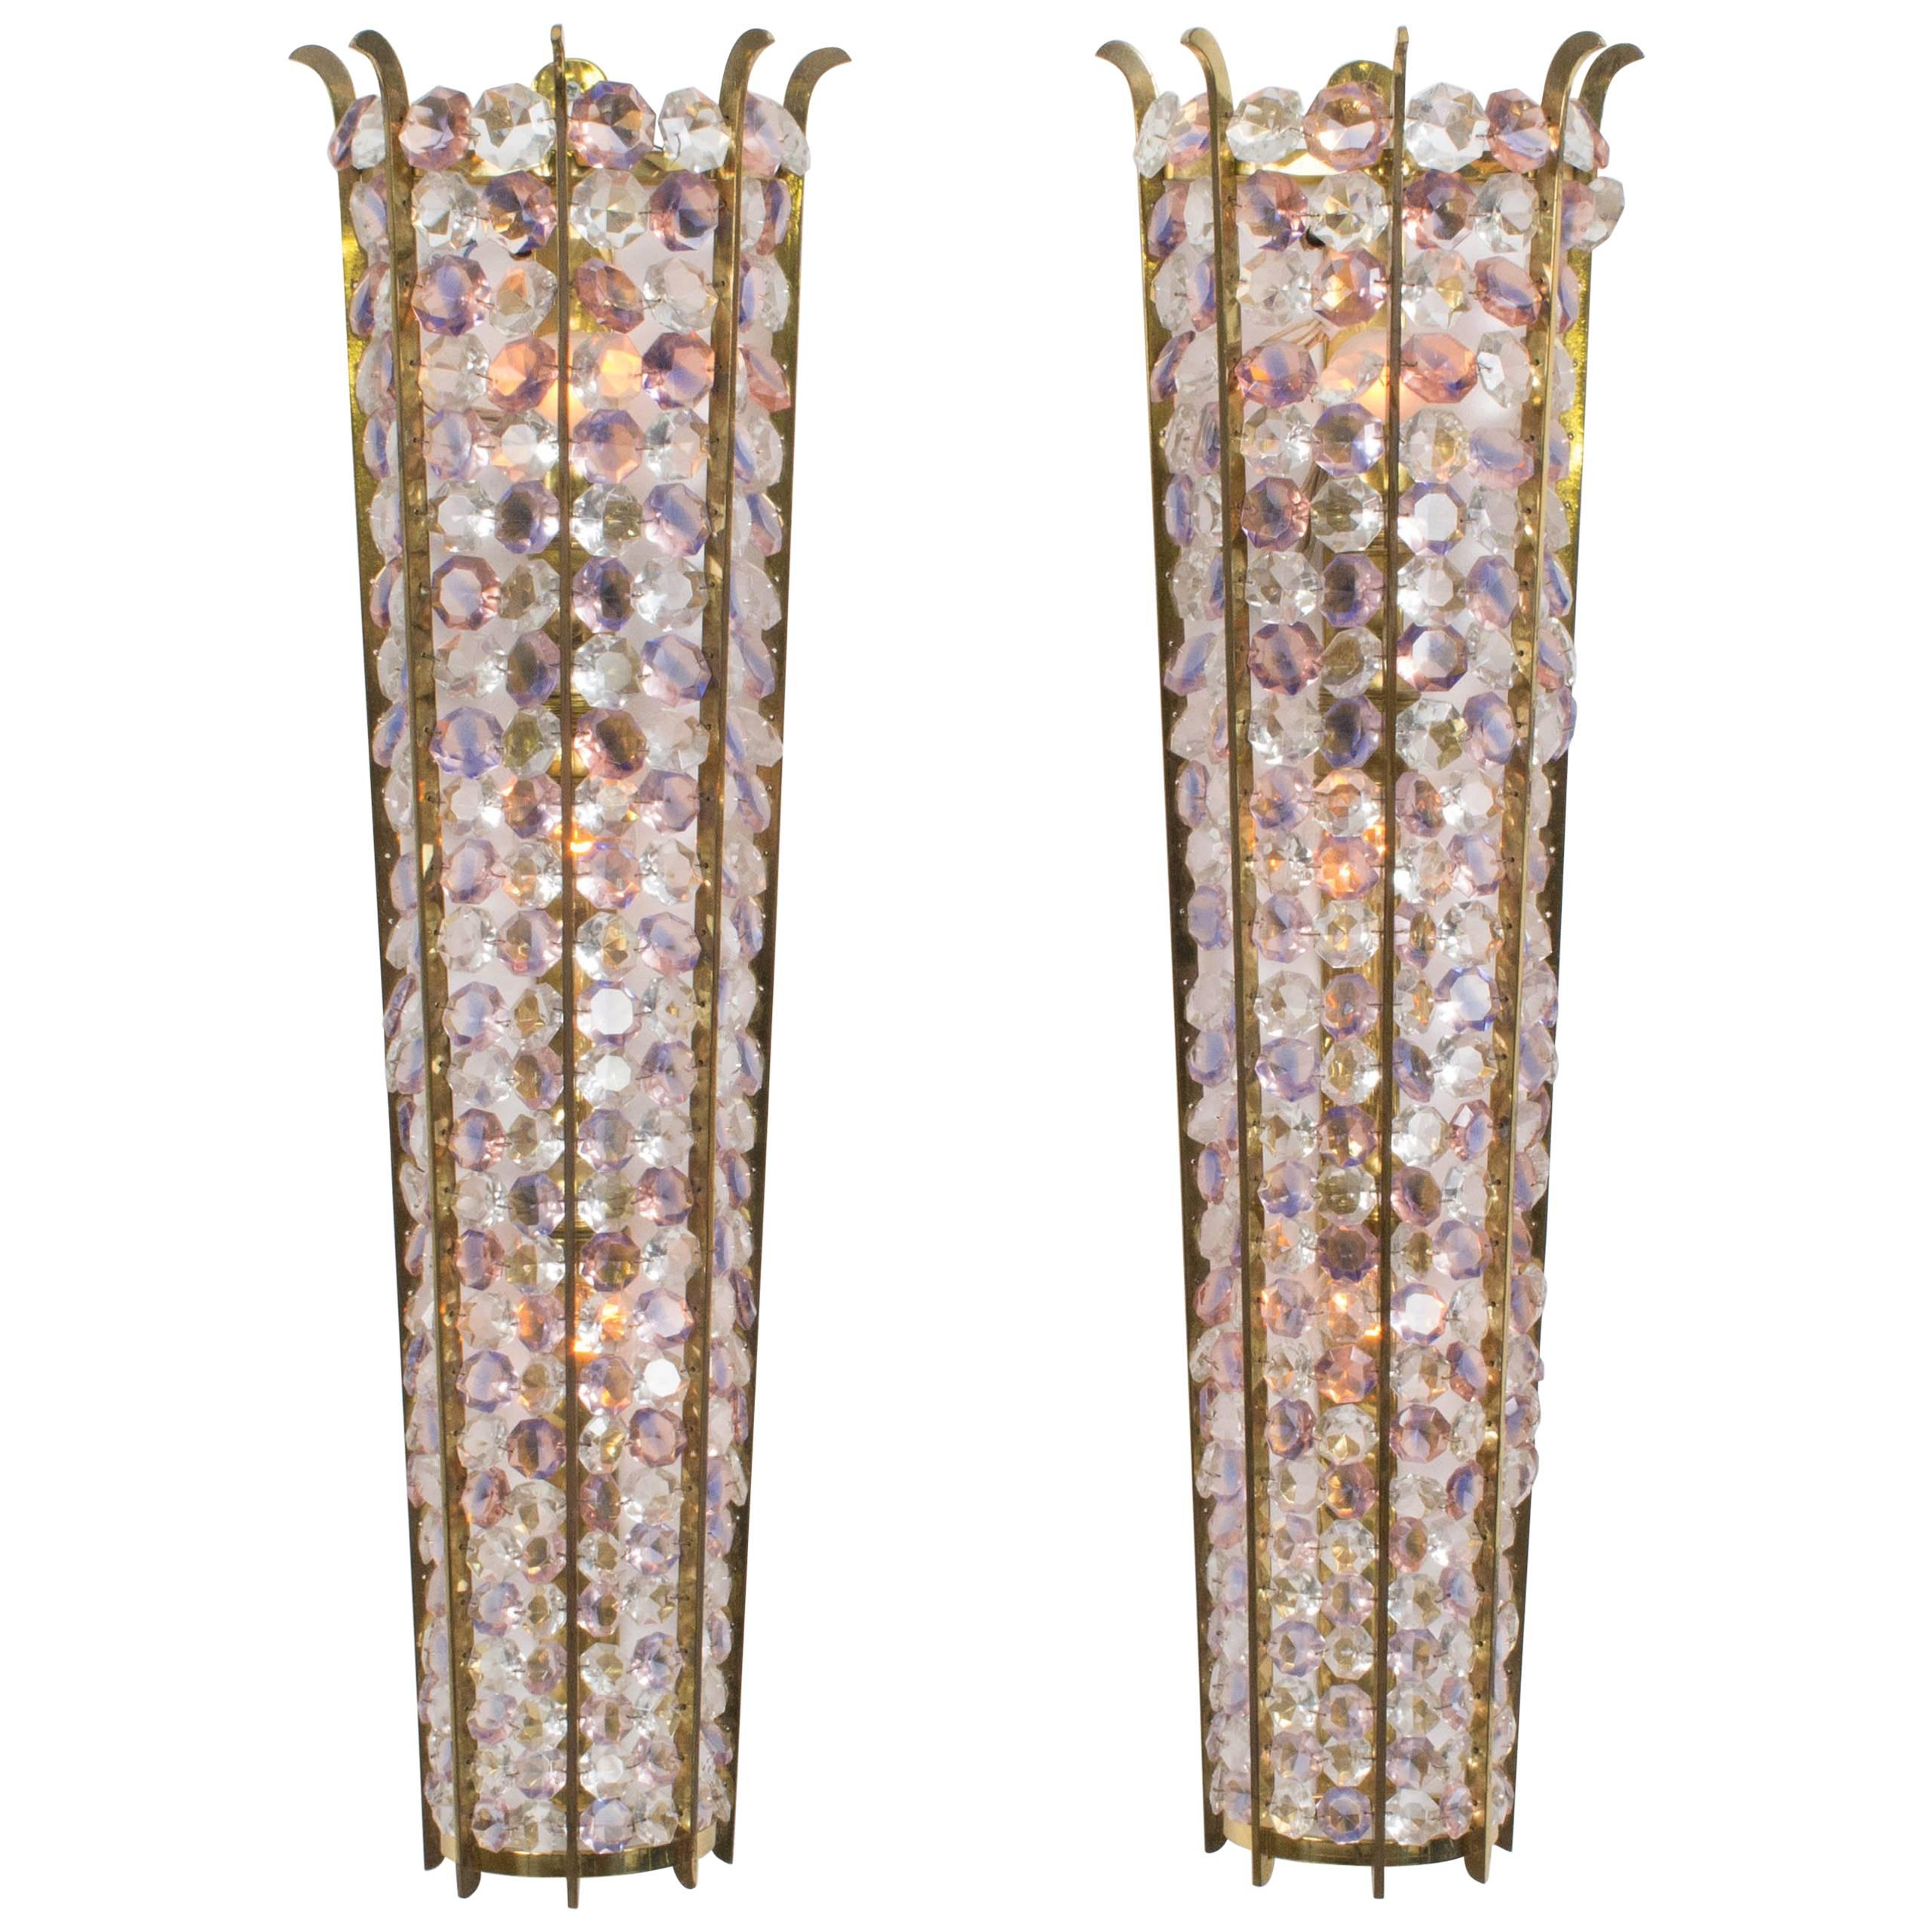 Magnificent Pair of Large Italian Mid-Century Modern Sconces, 1970s